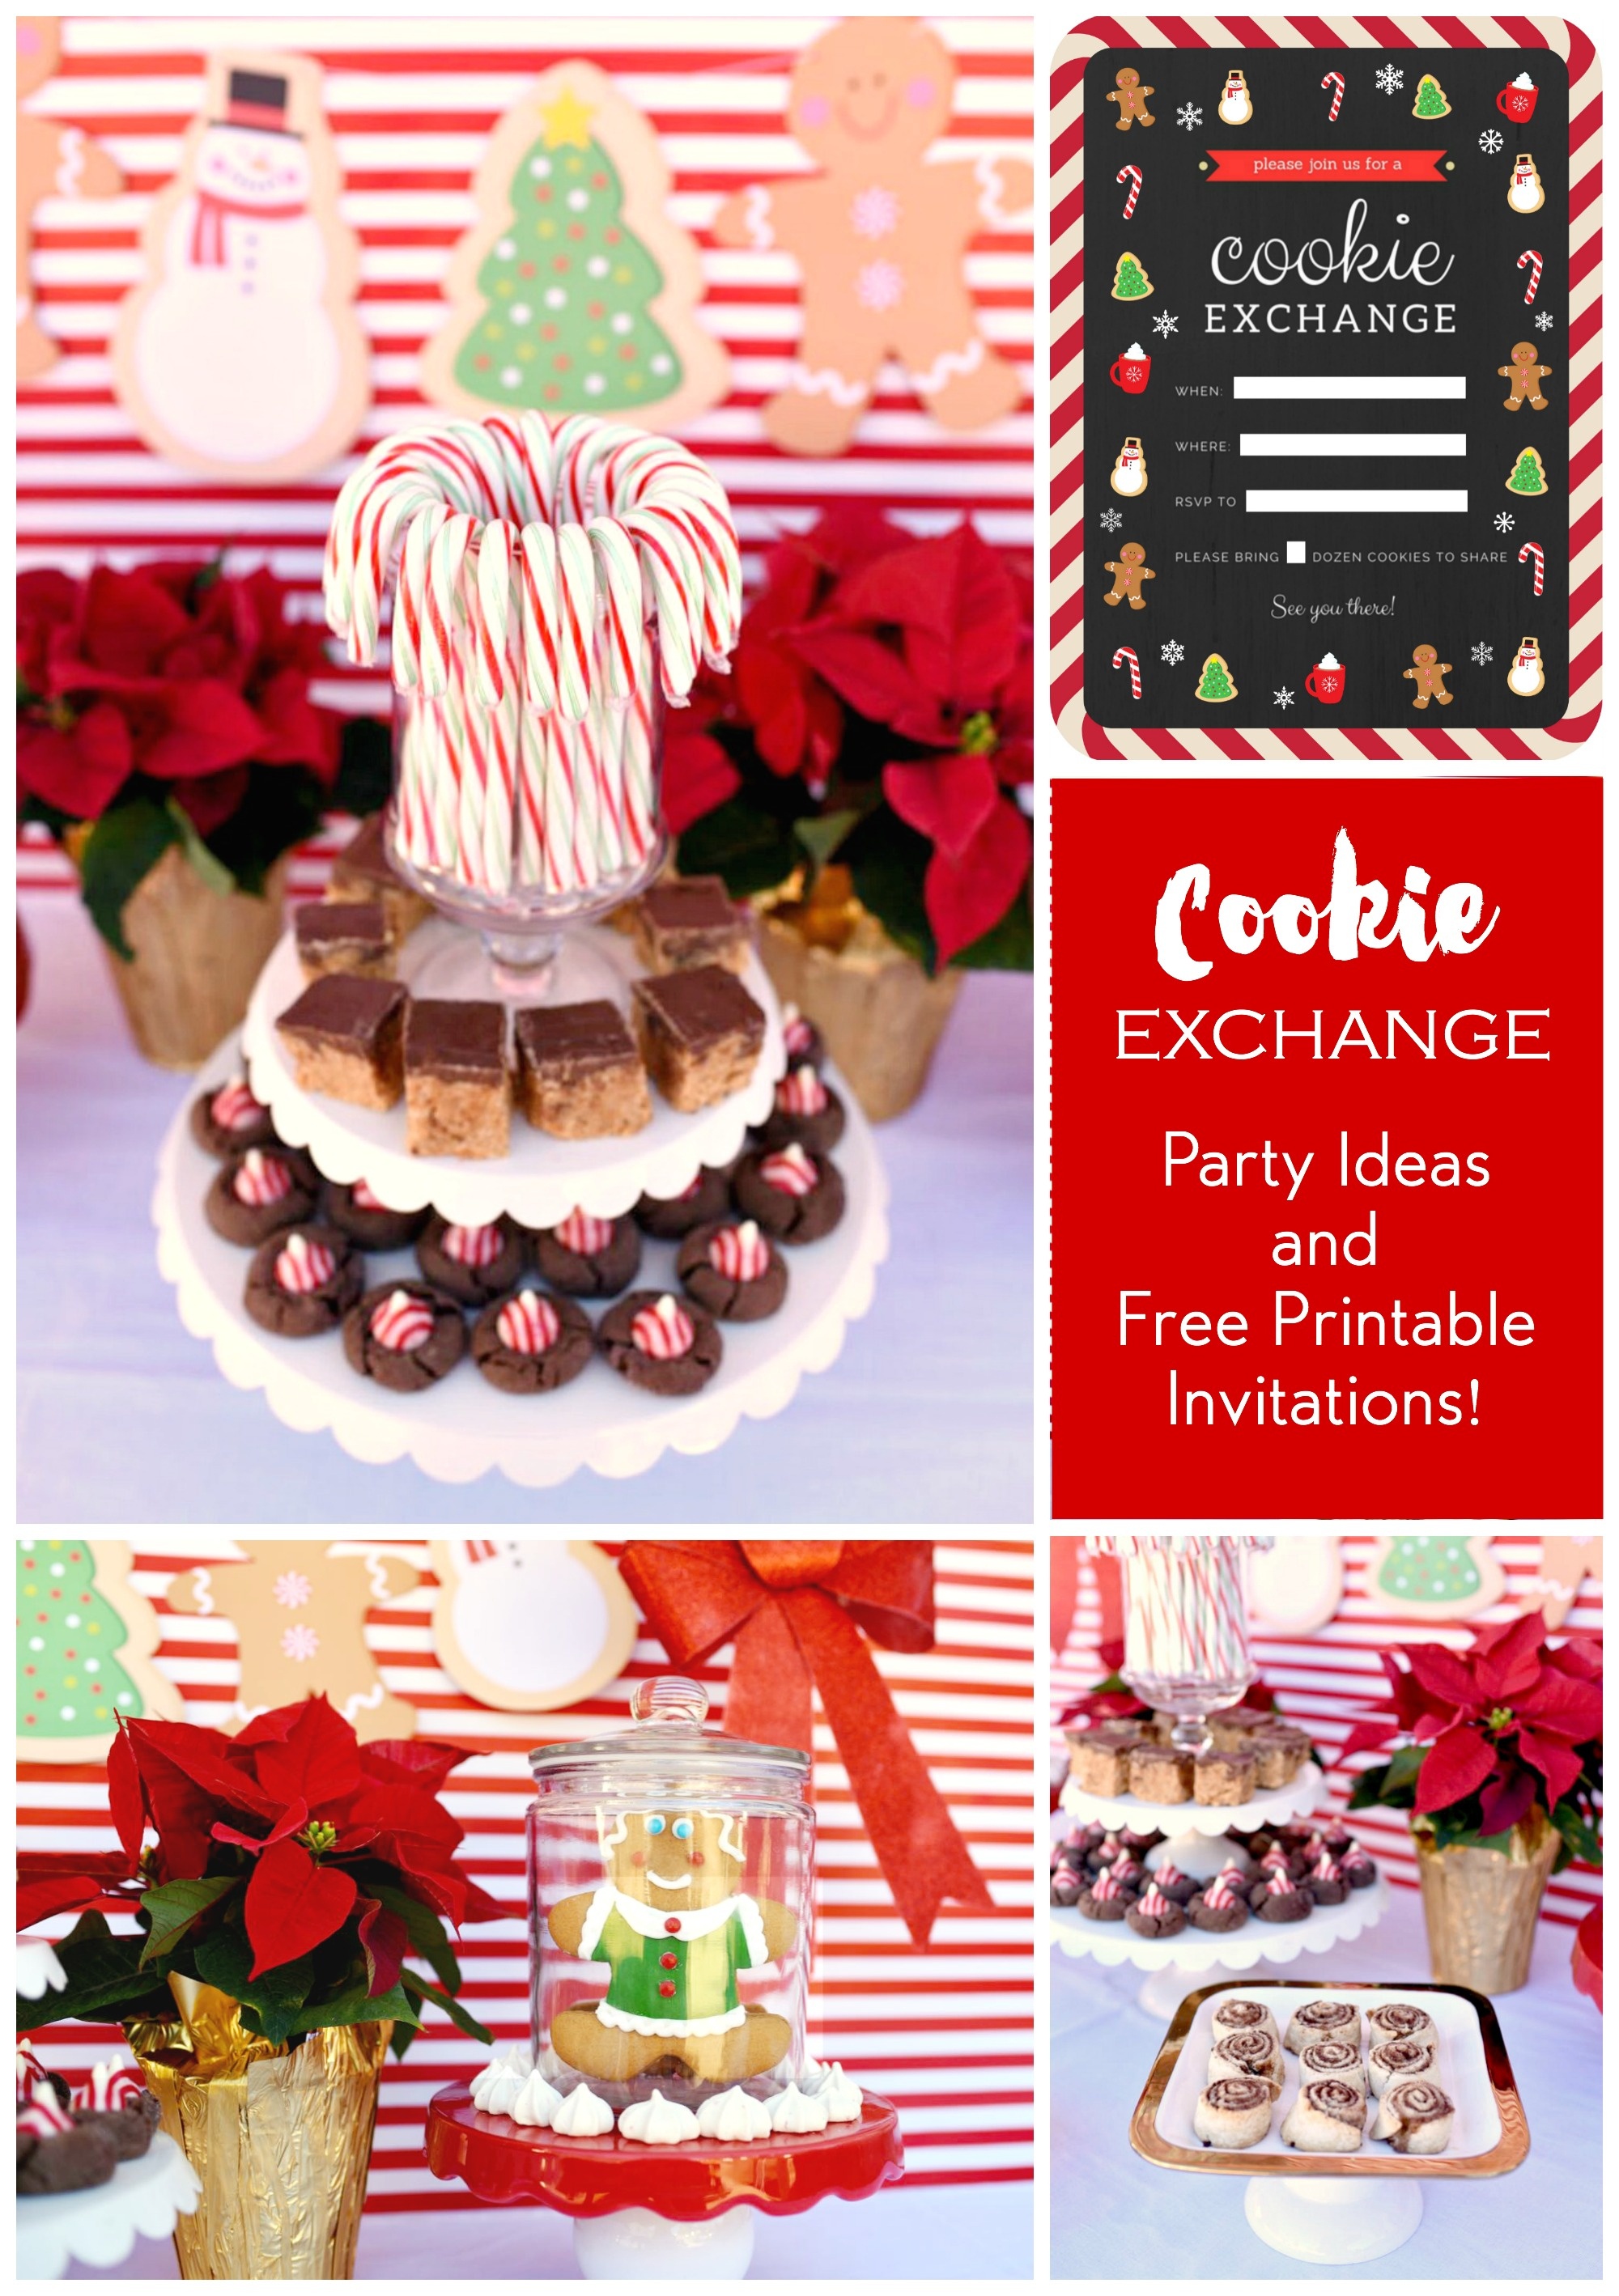 Cookie Exchange Party + Free Party Invitations - Make Life Lovely - Free Printable Cookie Decorating Invitations